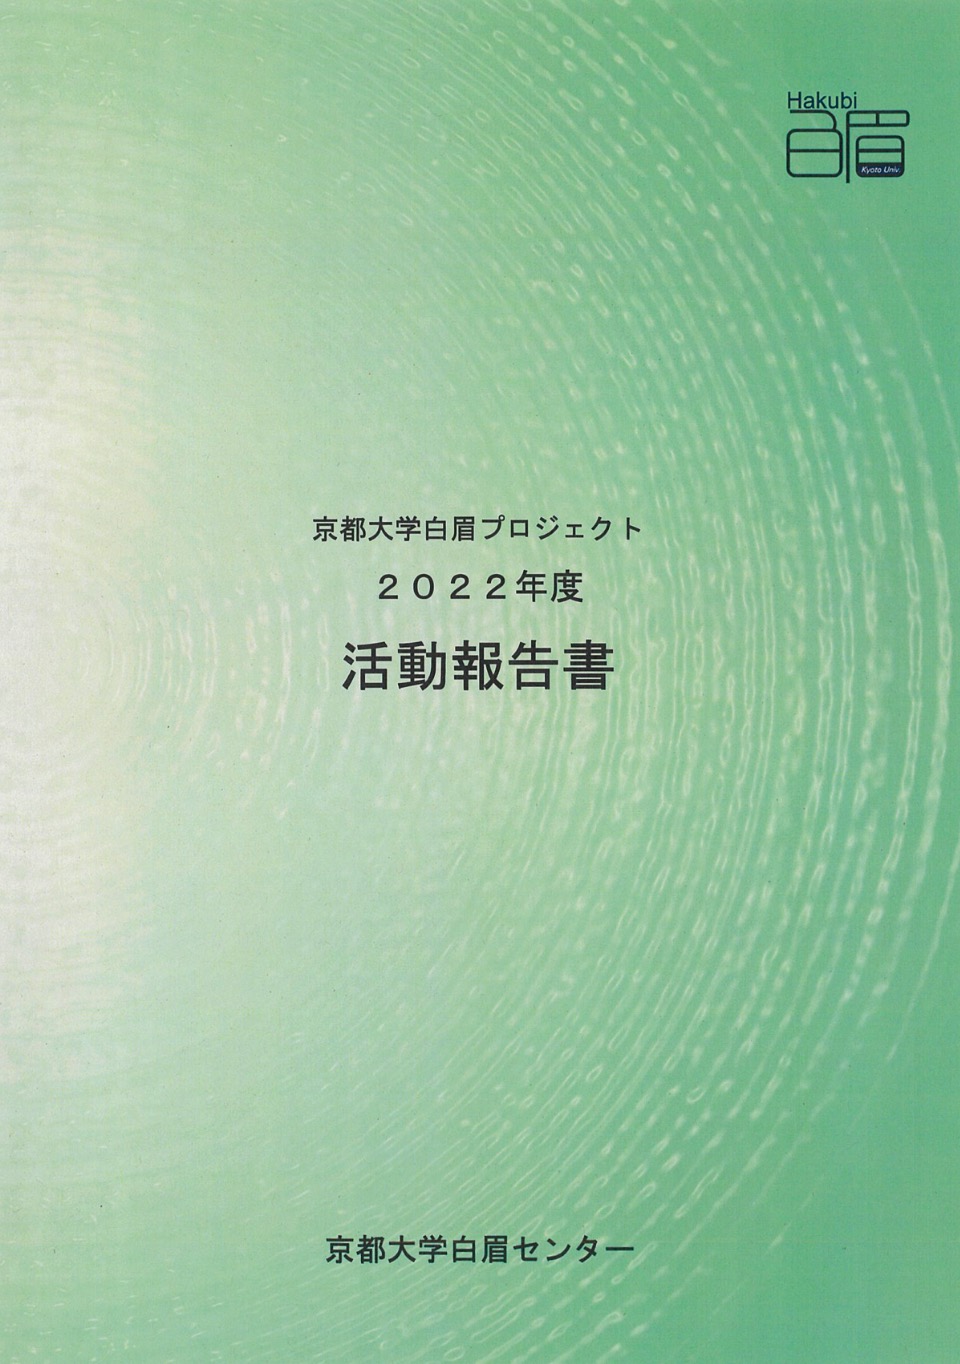 Hakubi Project Annual Report 2022（in Japanese）